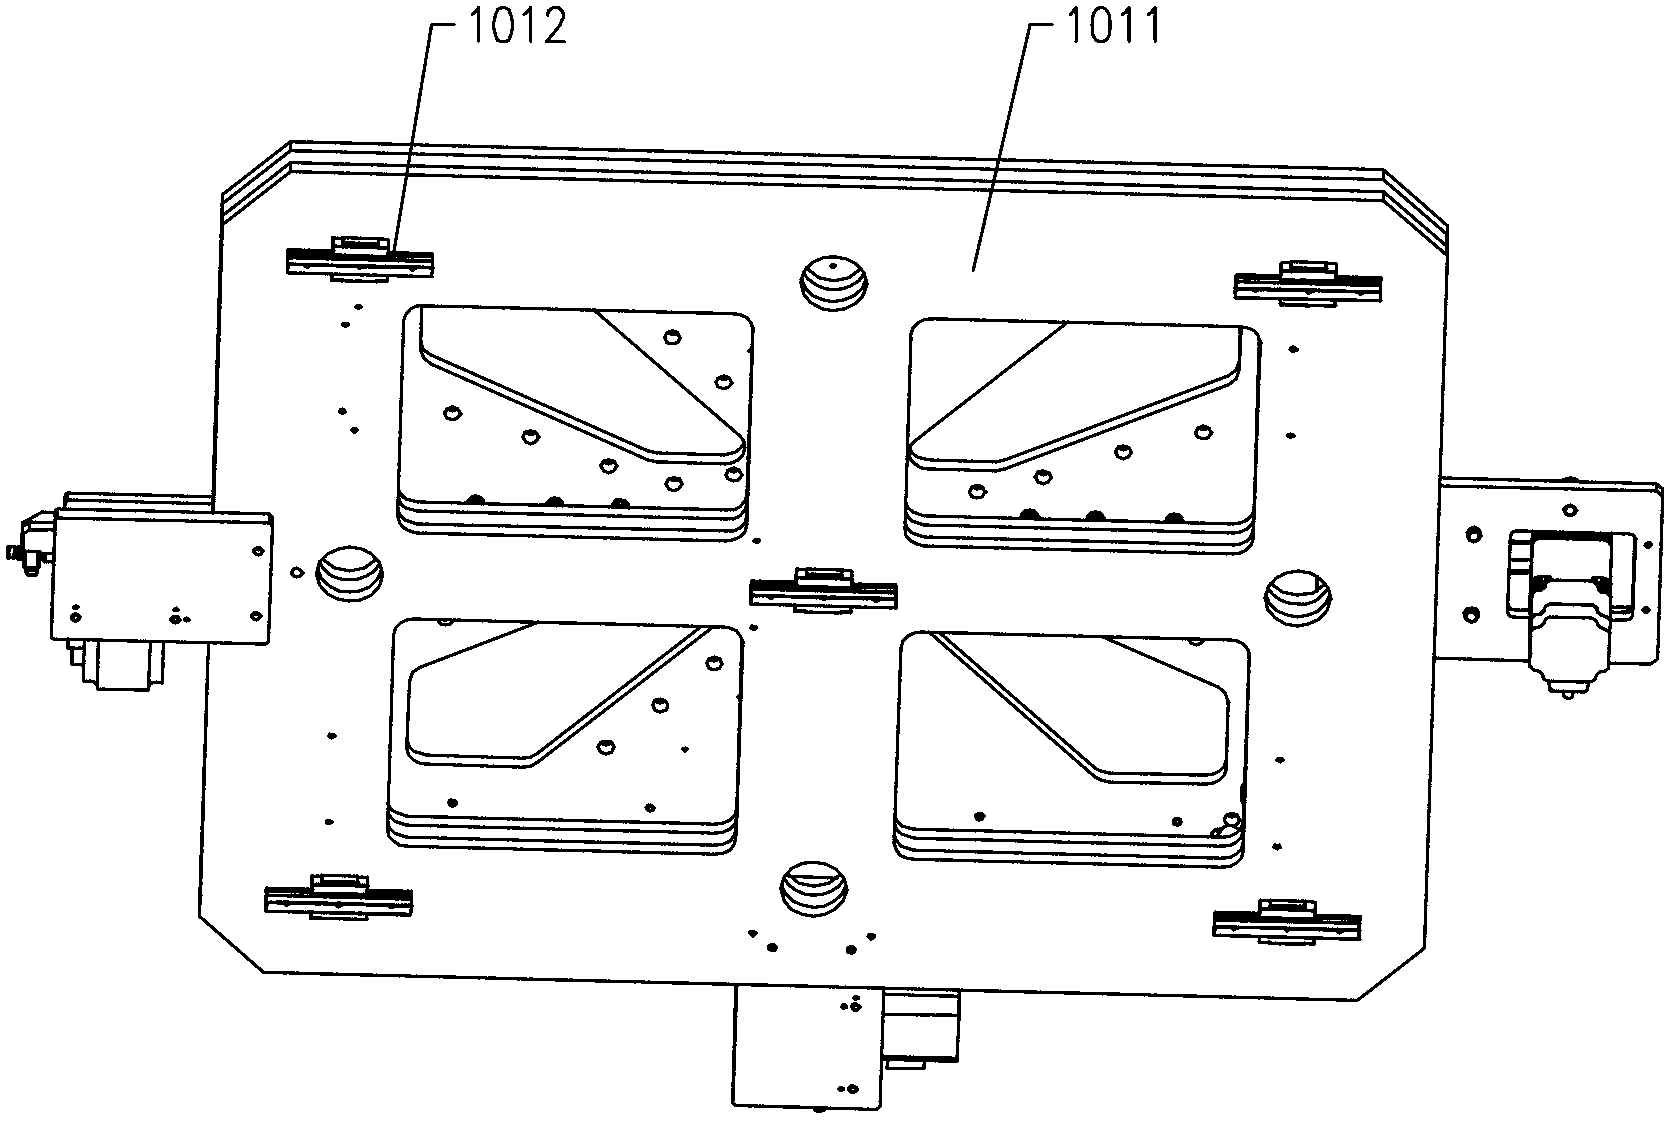 PCB and film alignment device